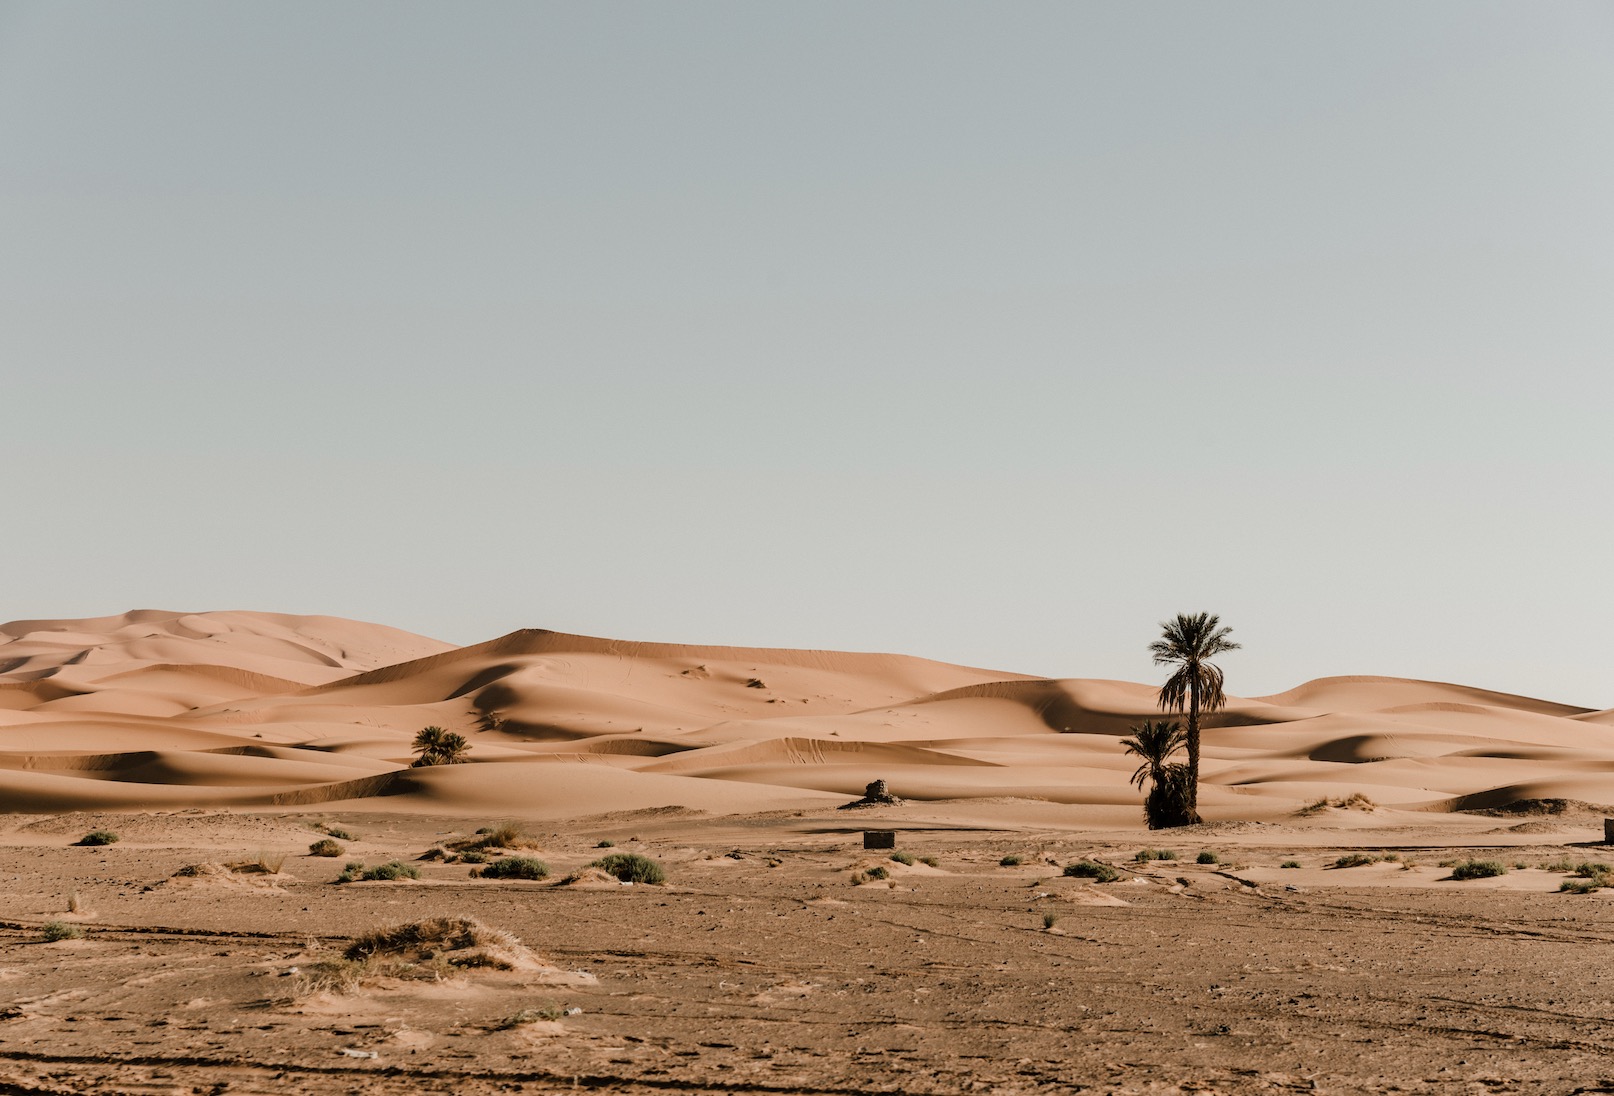 What Are the 6 Effects of Desertification?